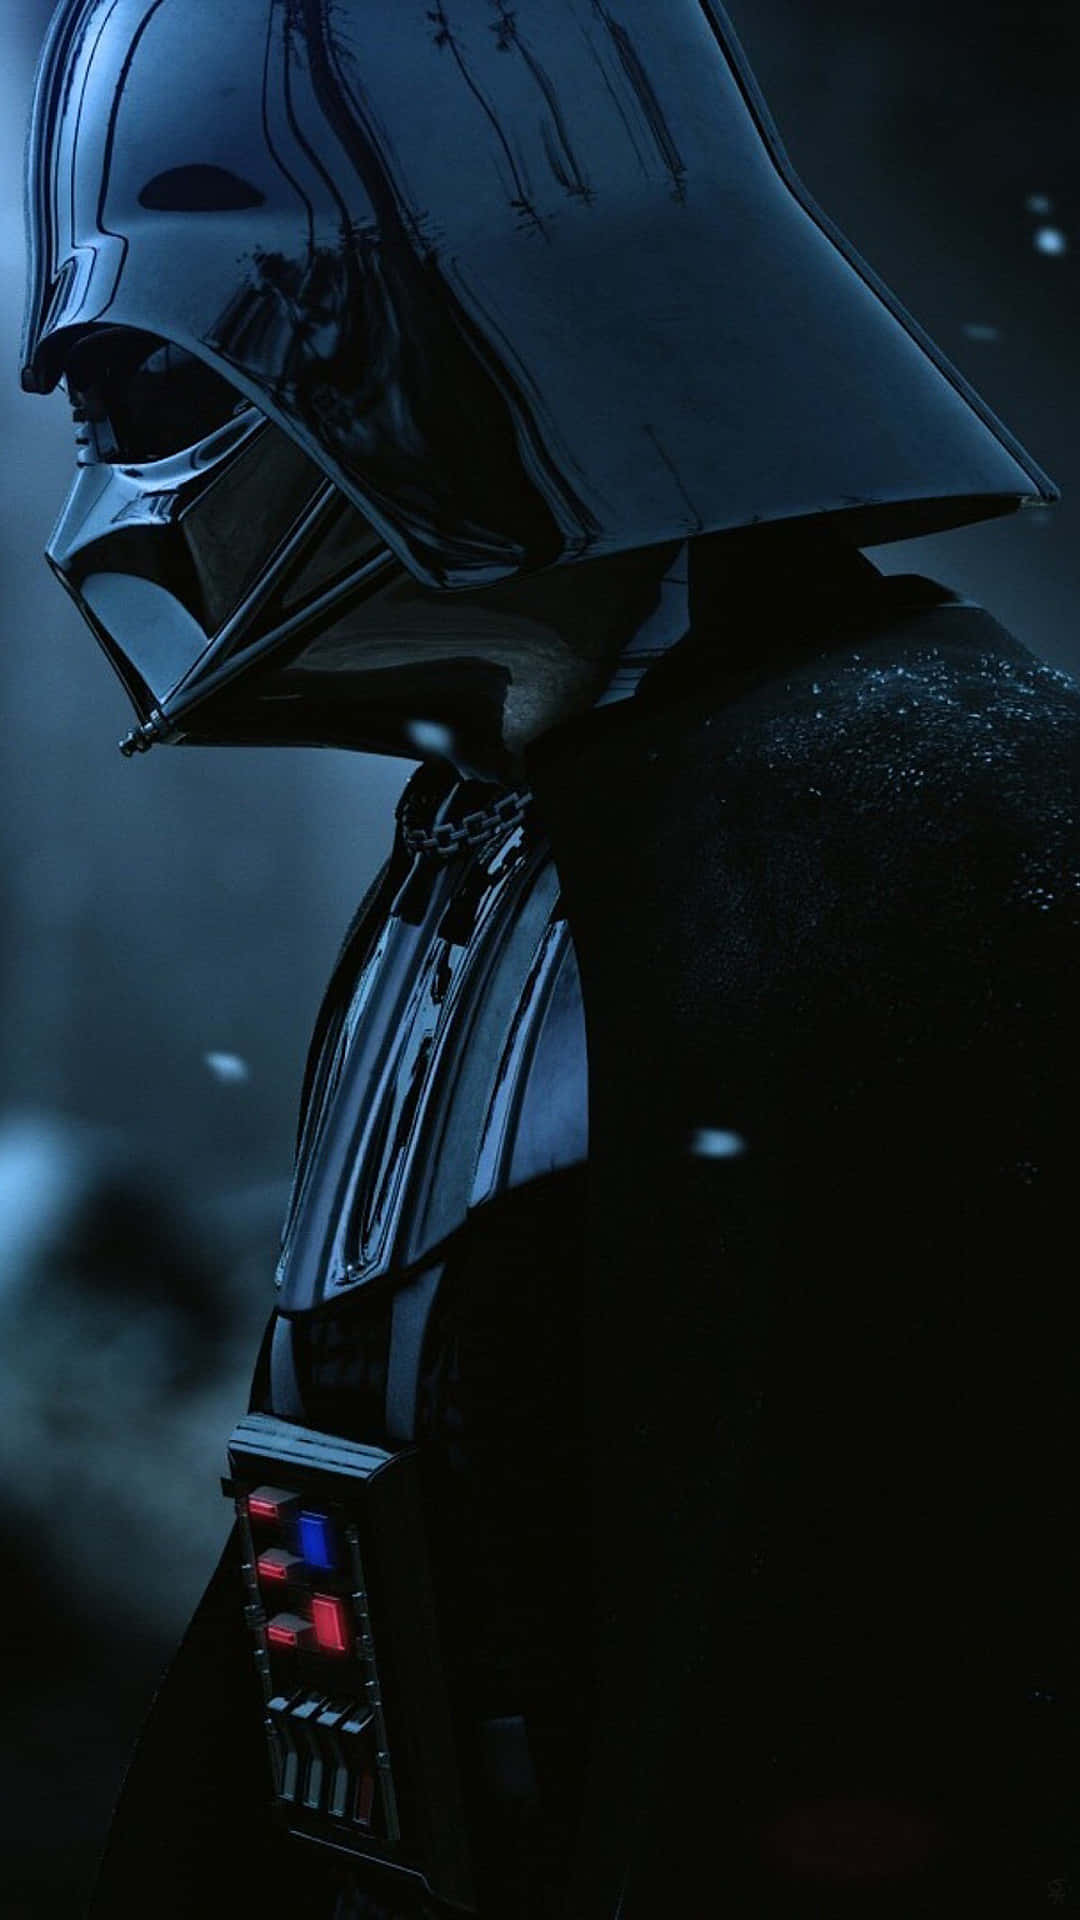 Show Off Your Dark Side with this Kylo Ren Iphone Wallpaper Wallpaper